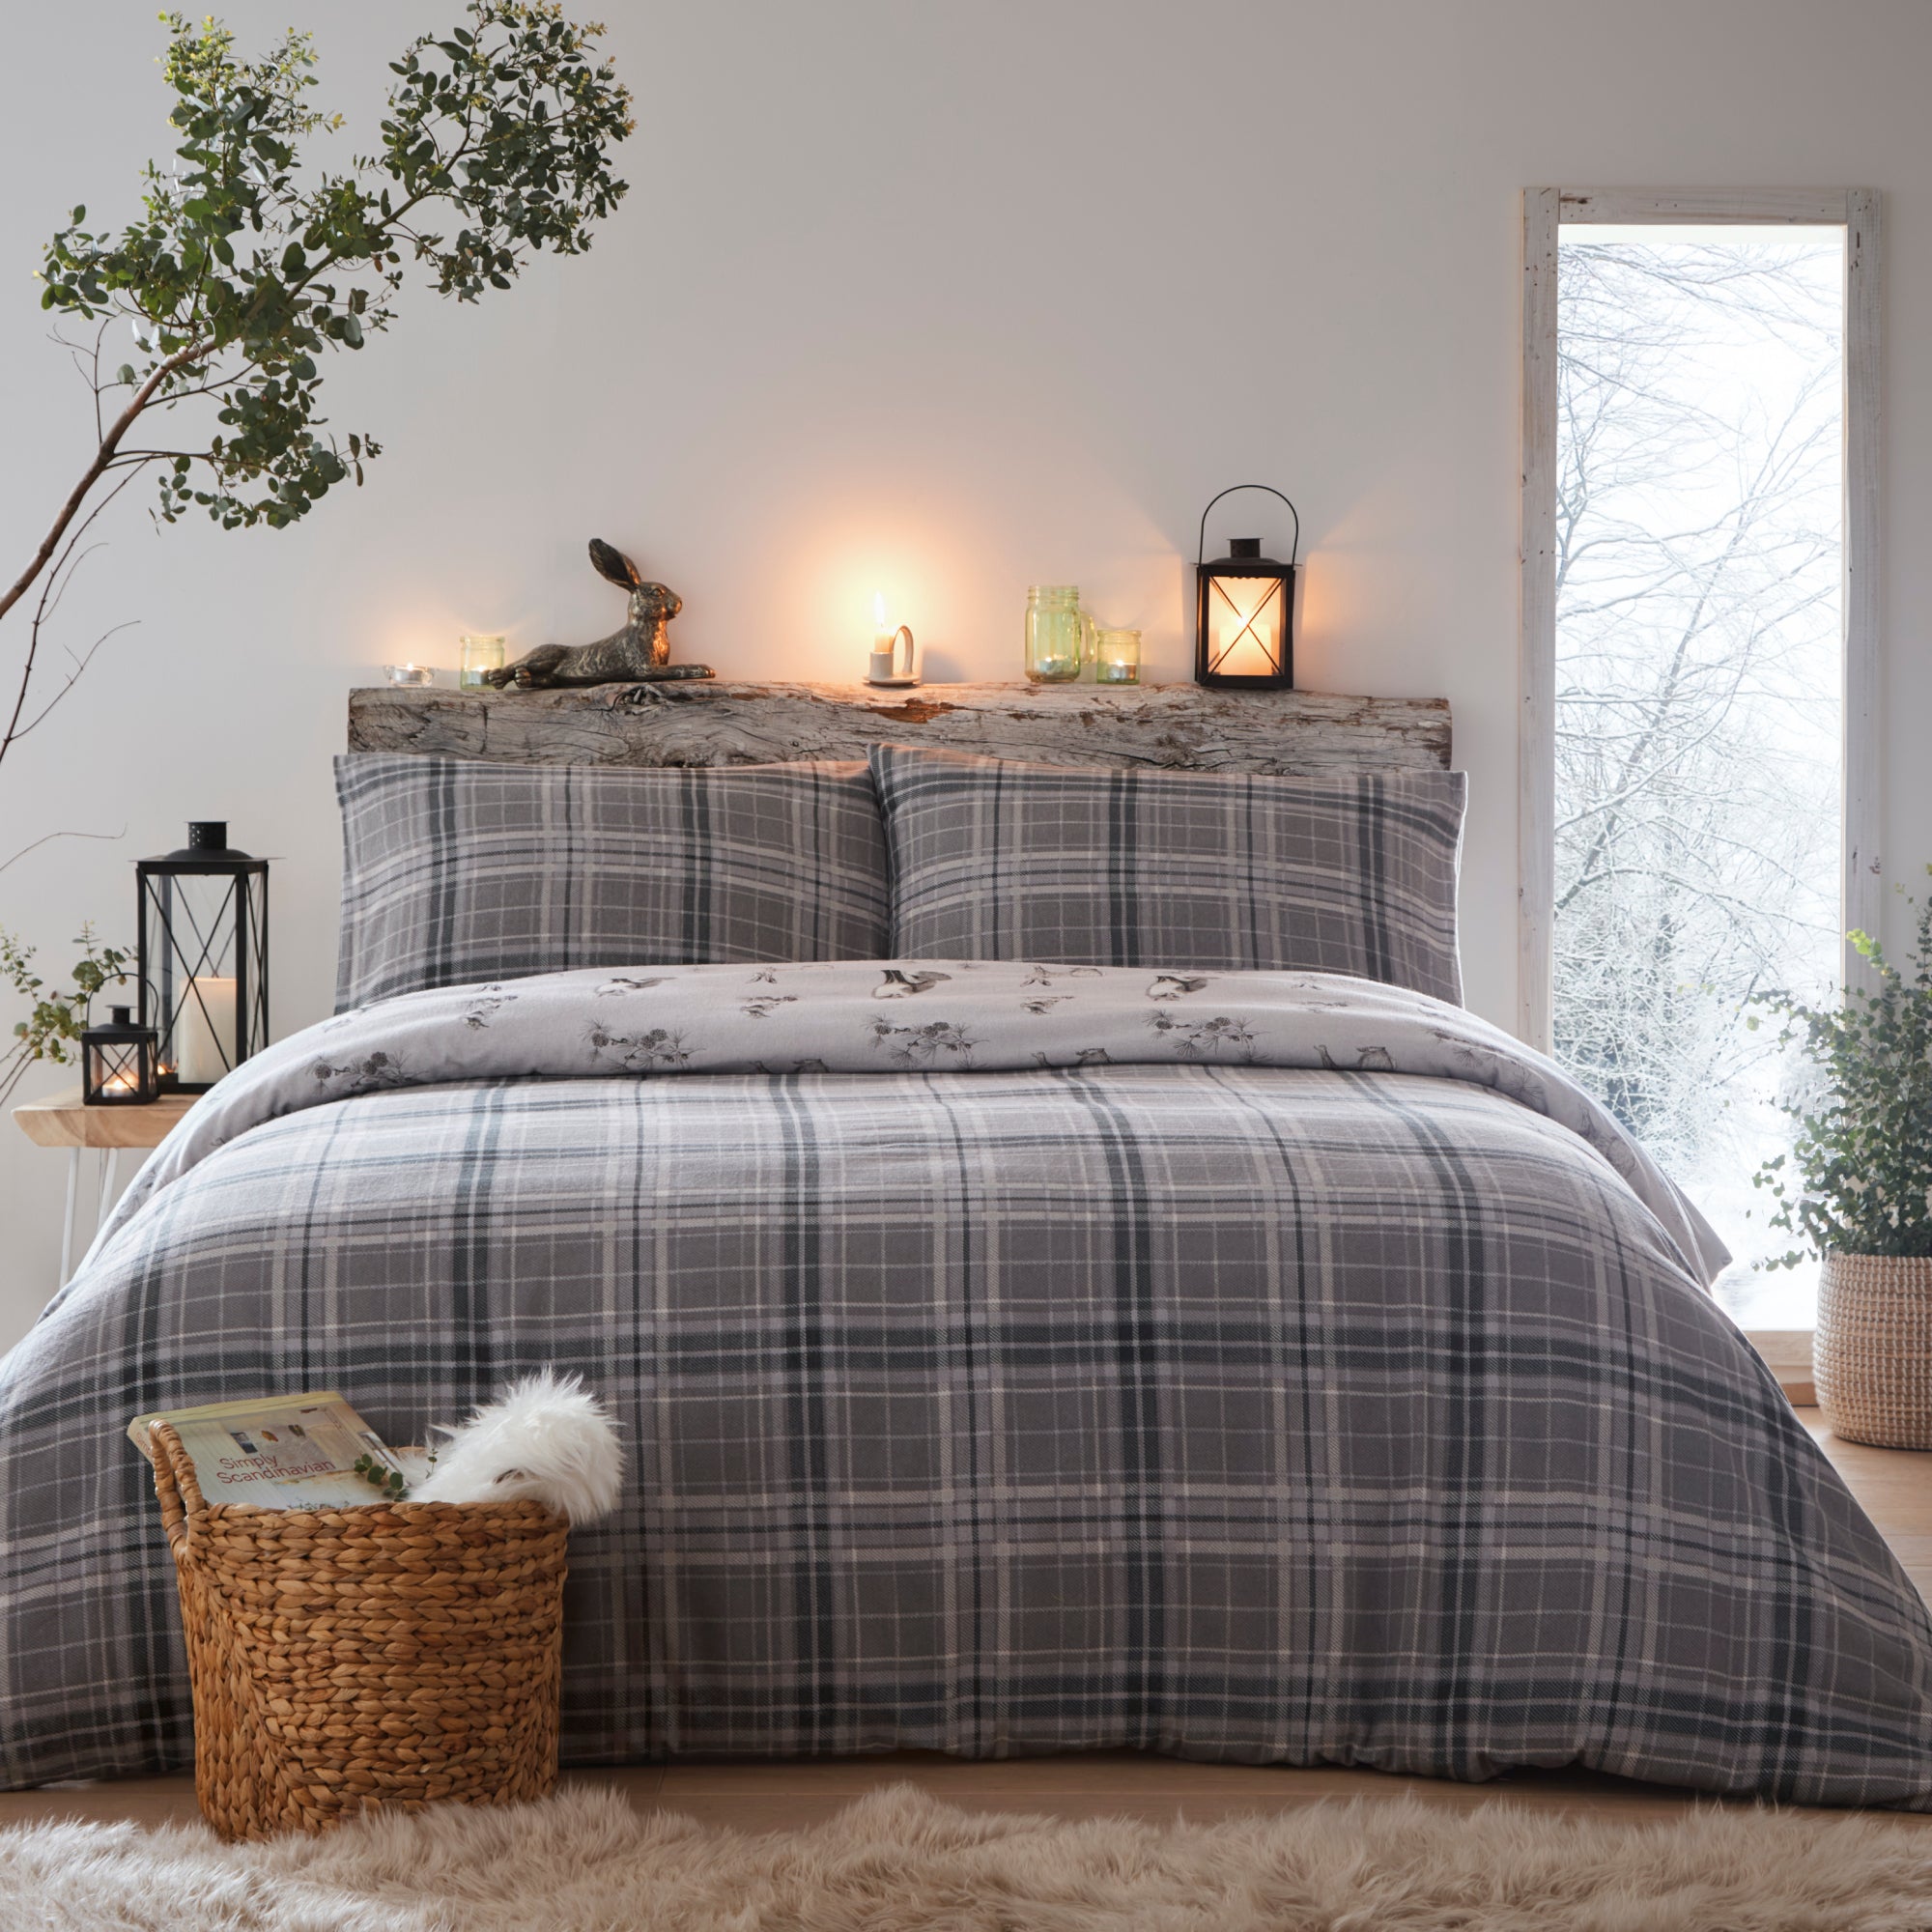 Duvet Cover Set Derwent Check by Dreams & Drapes Lodge in Grey